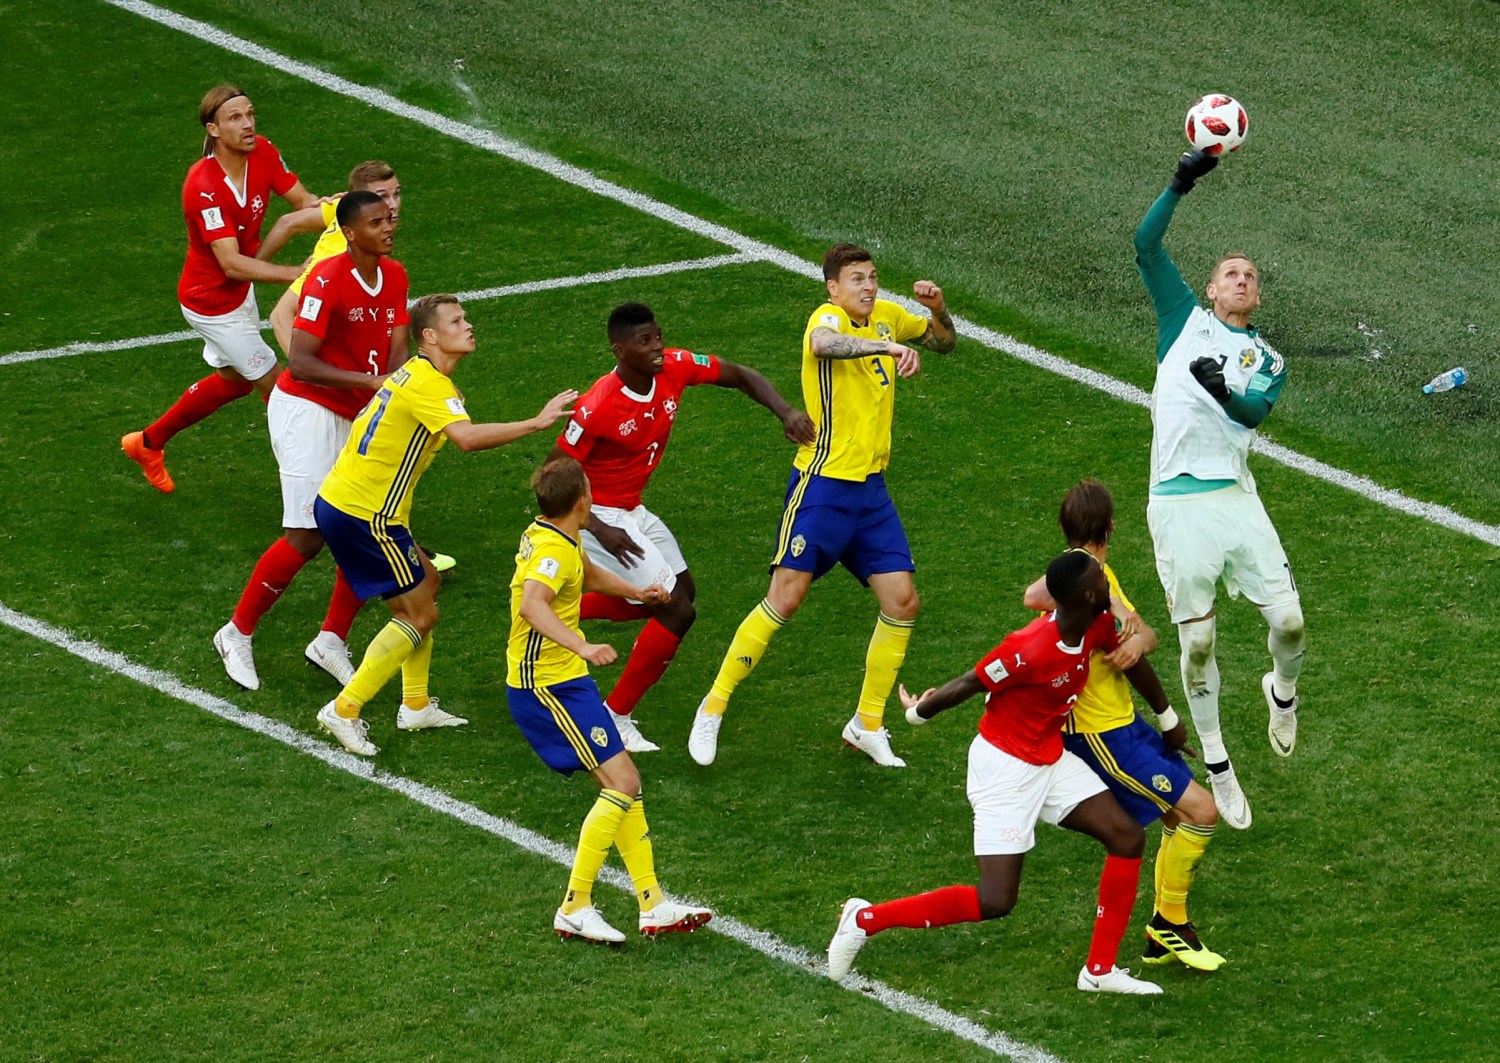 Soccer Football - World Cup - Round of 16 - Sweden vs Switzerland - Saint Petersburg Stadium, Saint Petersburg, Russia - July 3, 2018  Sweden's Robin Olsen in action  REUTERS/Jason Cairnduff     TPX IMAGES OF THE DAY - RC1C8474D500